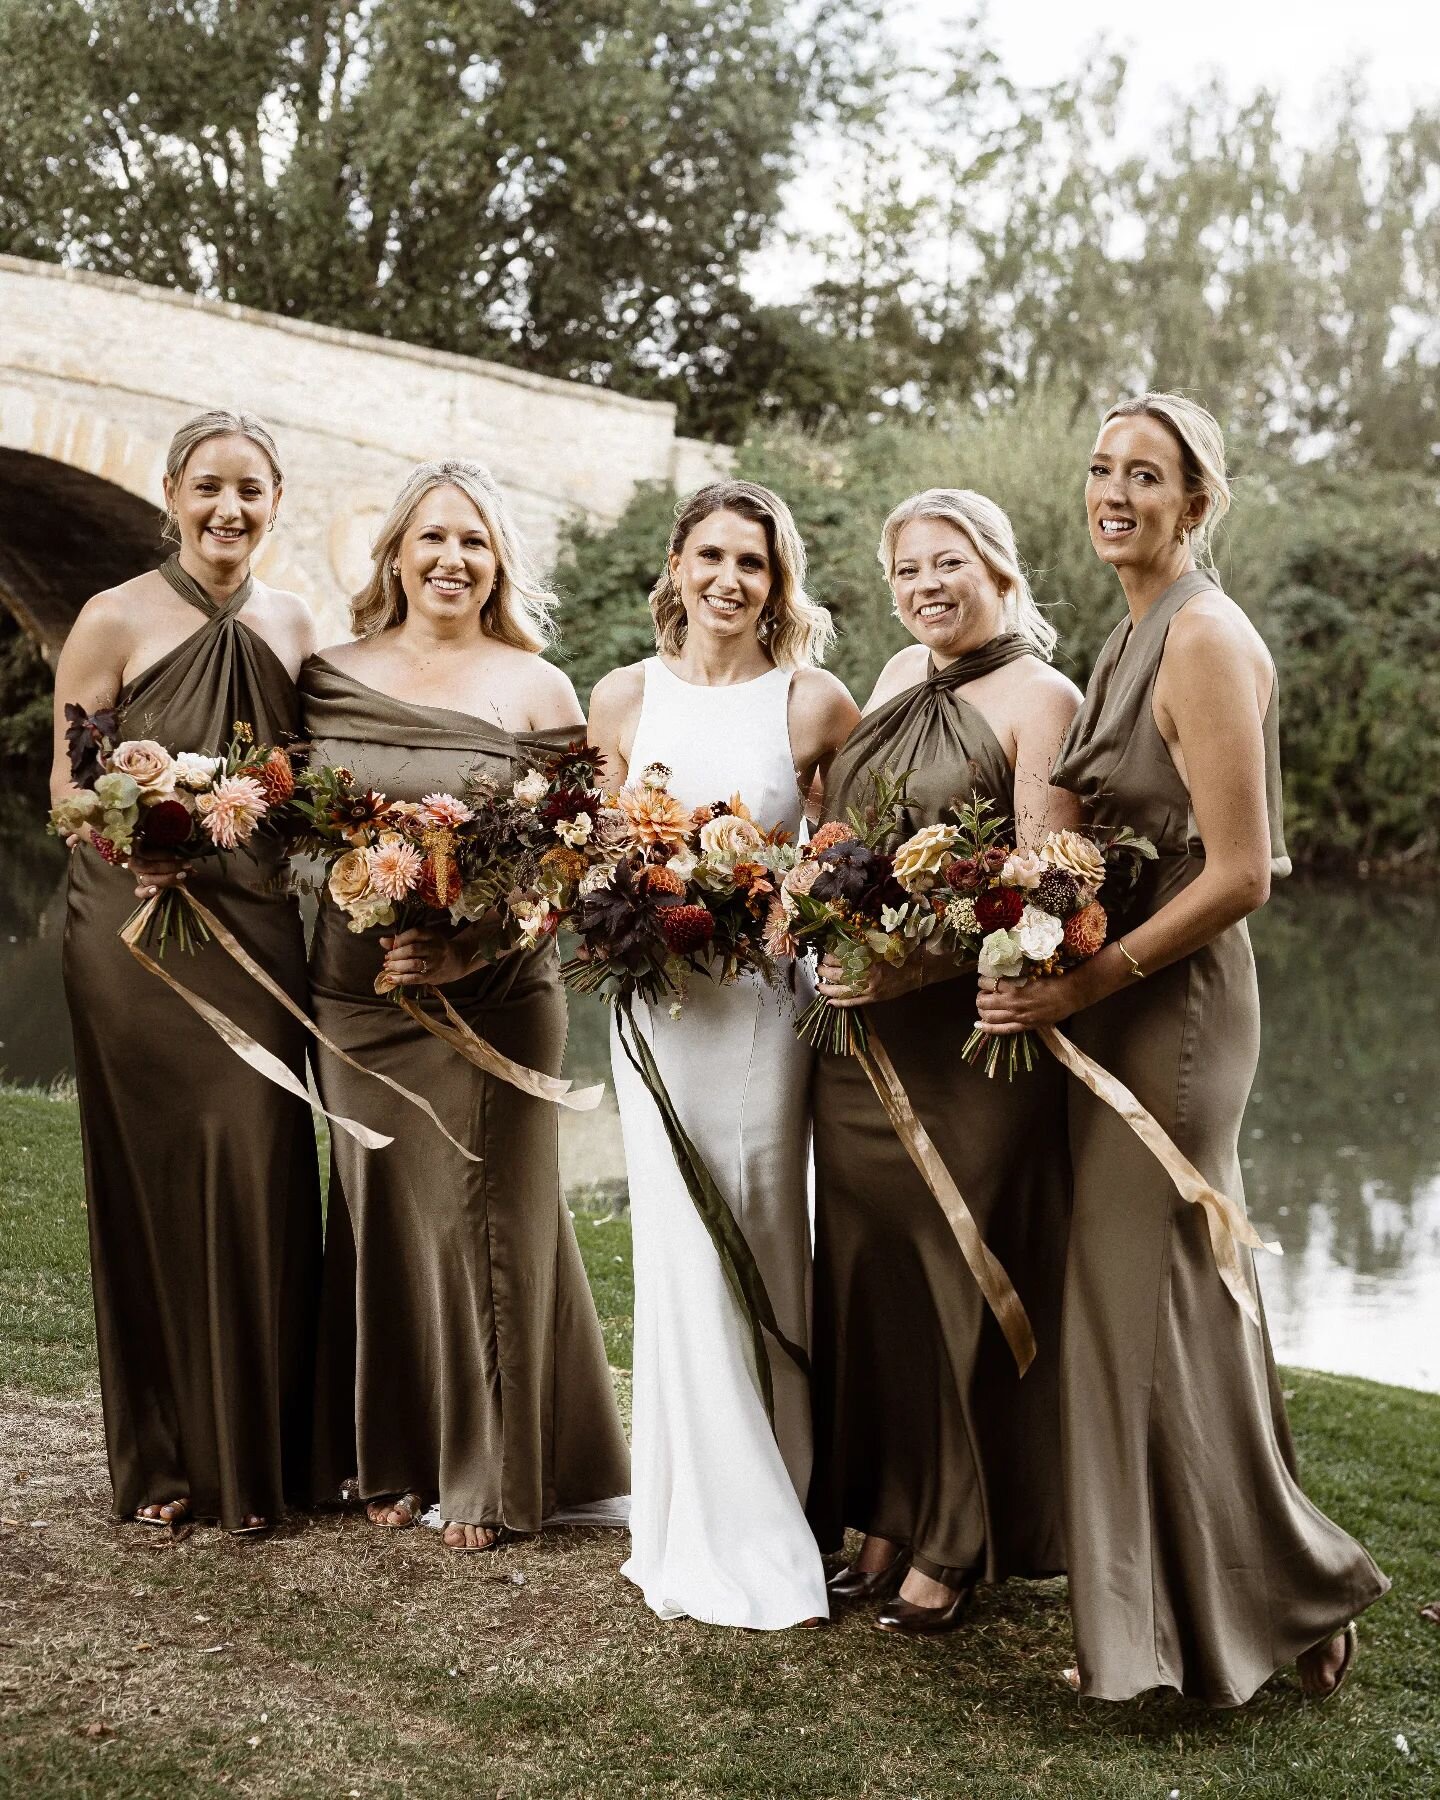 ABI &amp; HER GIRLS in those beautiful olive green dresses and late summer bouquets featuring all the dreamy dahlias.

Planning an autumn wedding? We do still have some availability for September/October weddings at the moment - lots of our wedding w